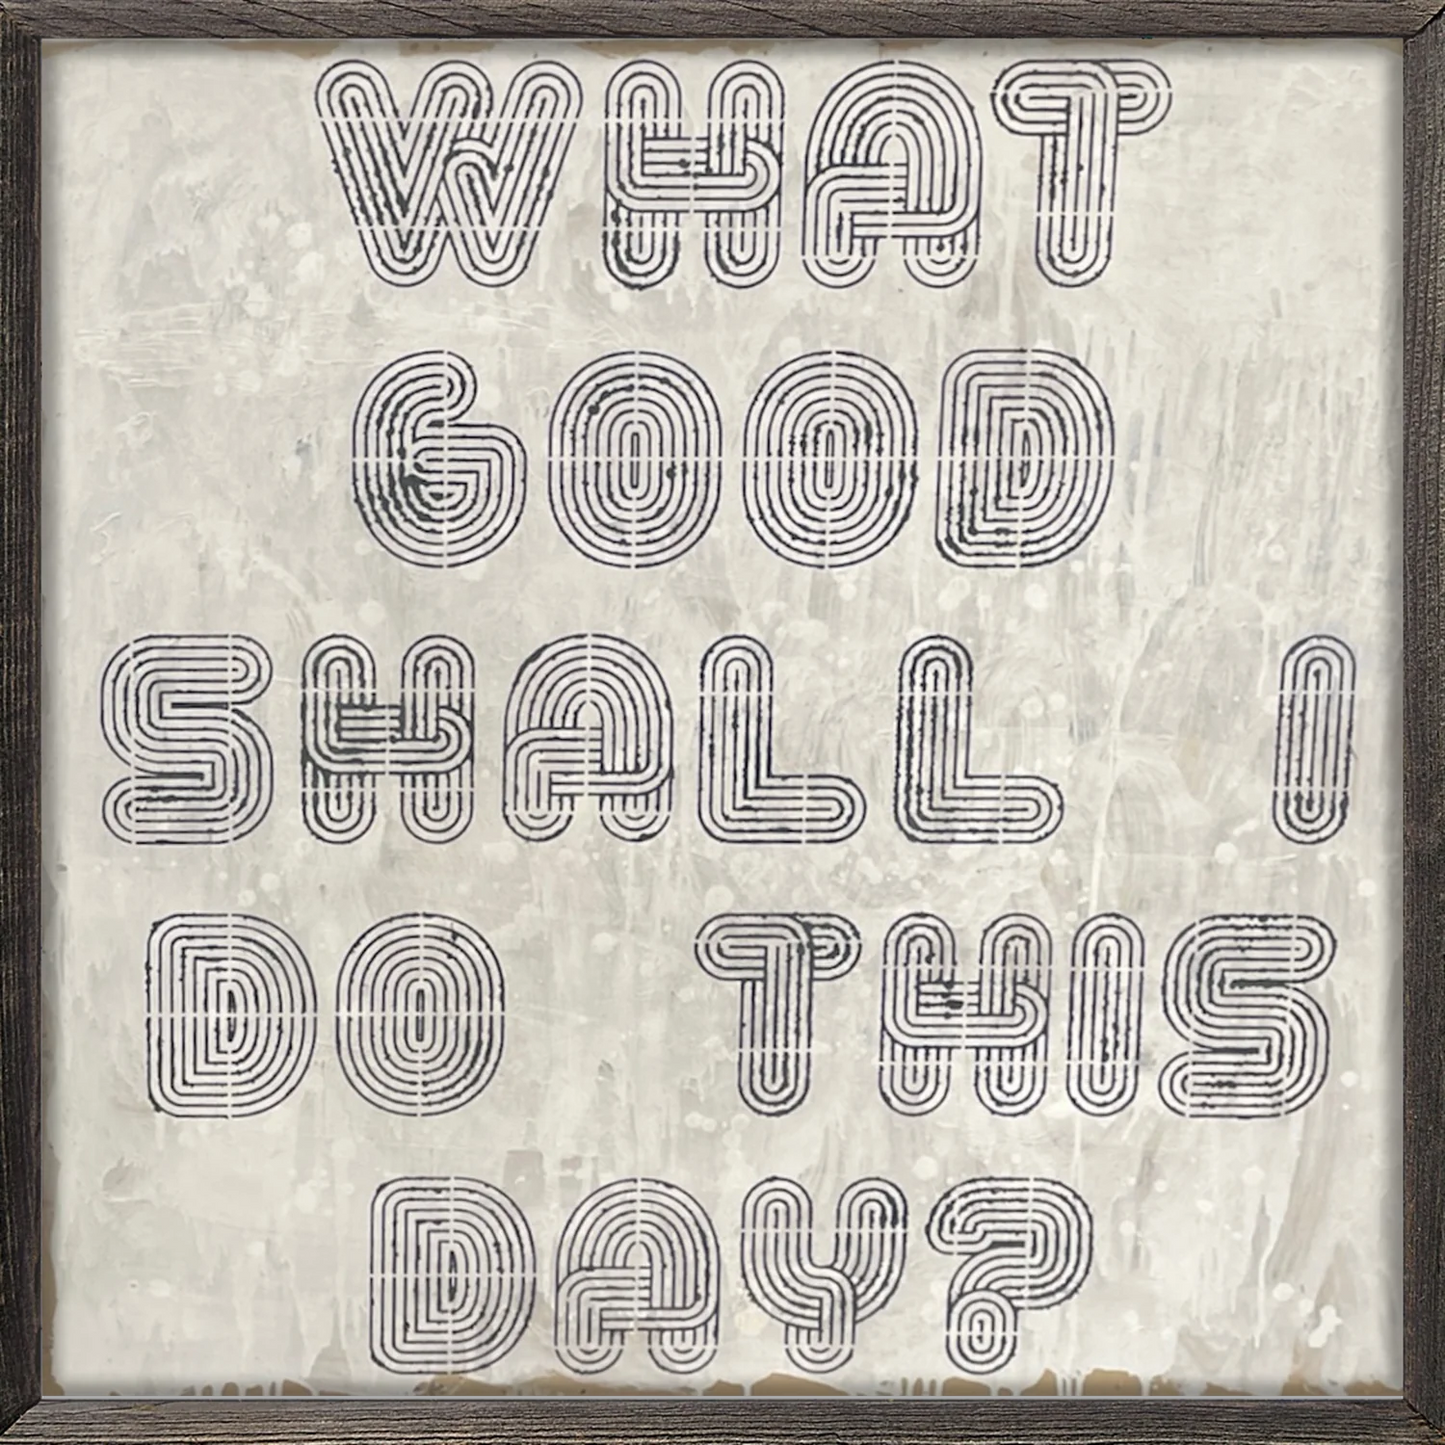 What Good Shall I Do This Day - Art Print